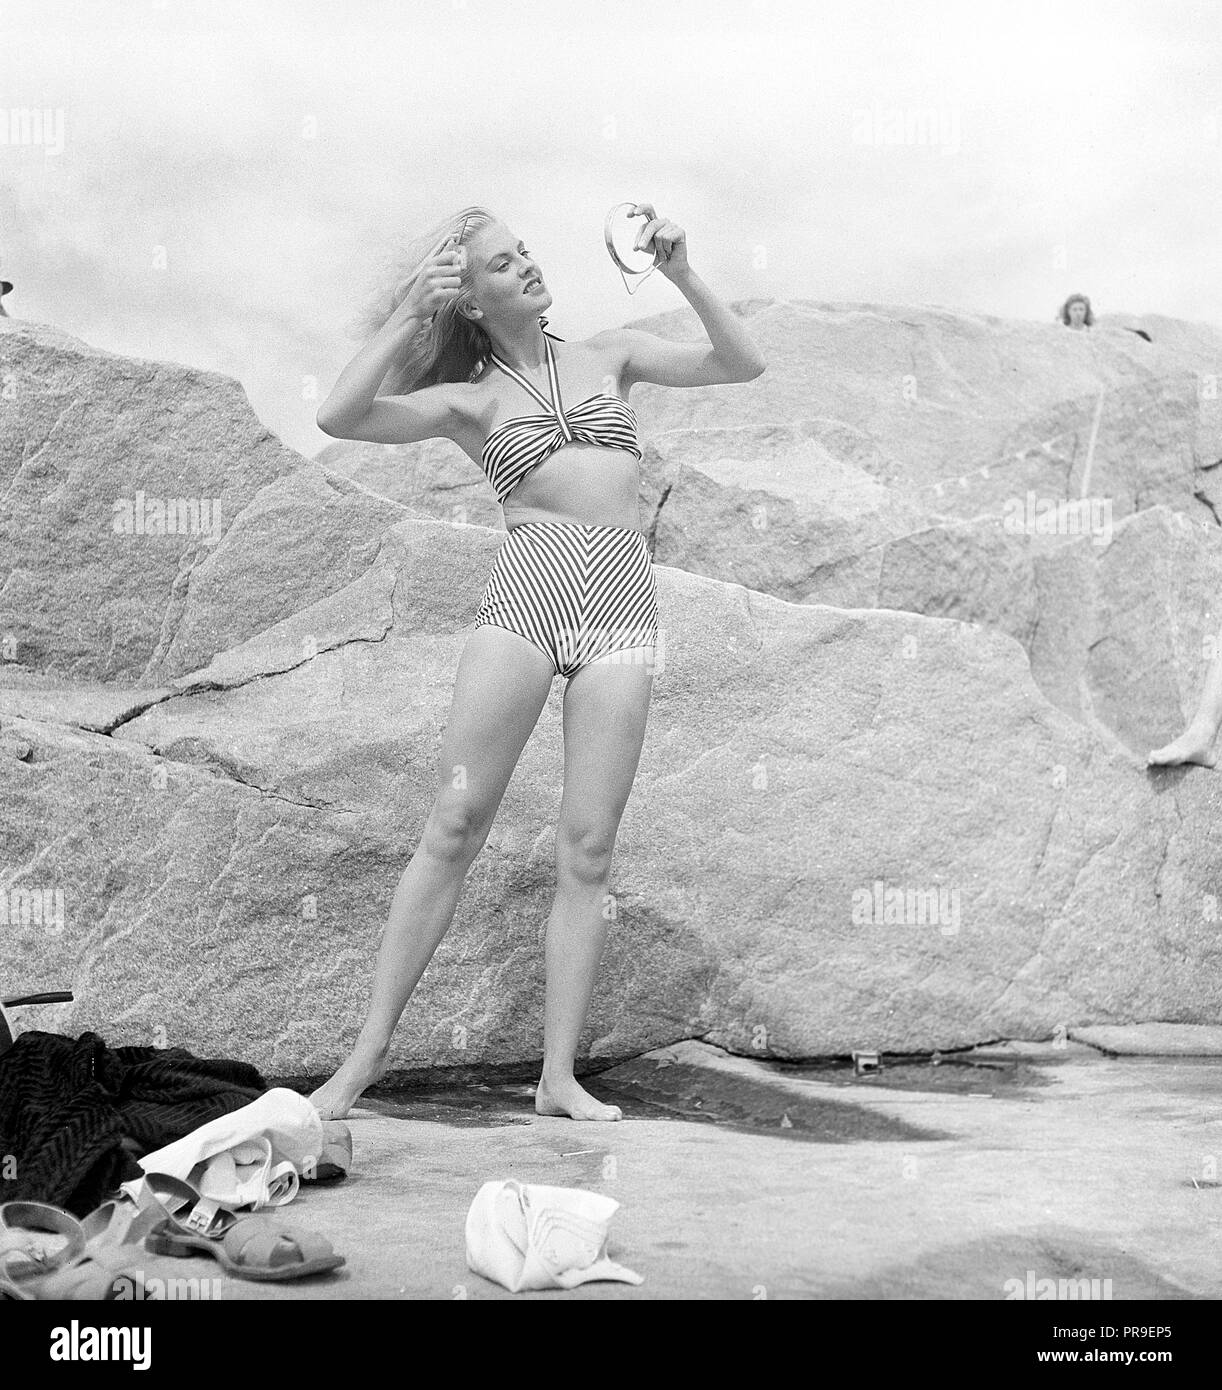 1940s bikini fashion. It's a sunny day and the blonde young woman is  wearing a typical 1940s two piece bathing suit or bikini. The pattern of  the fabric is an eyecatching design